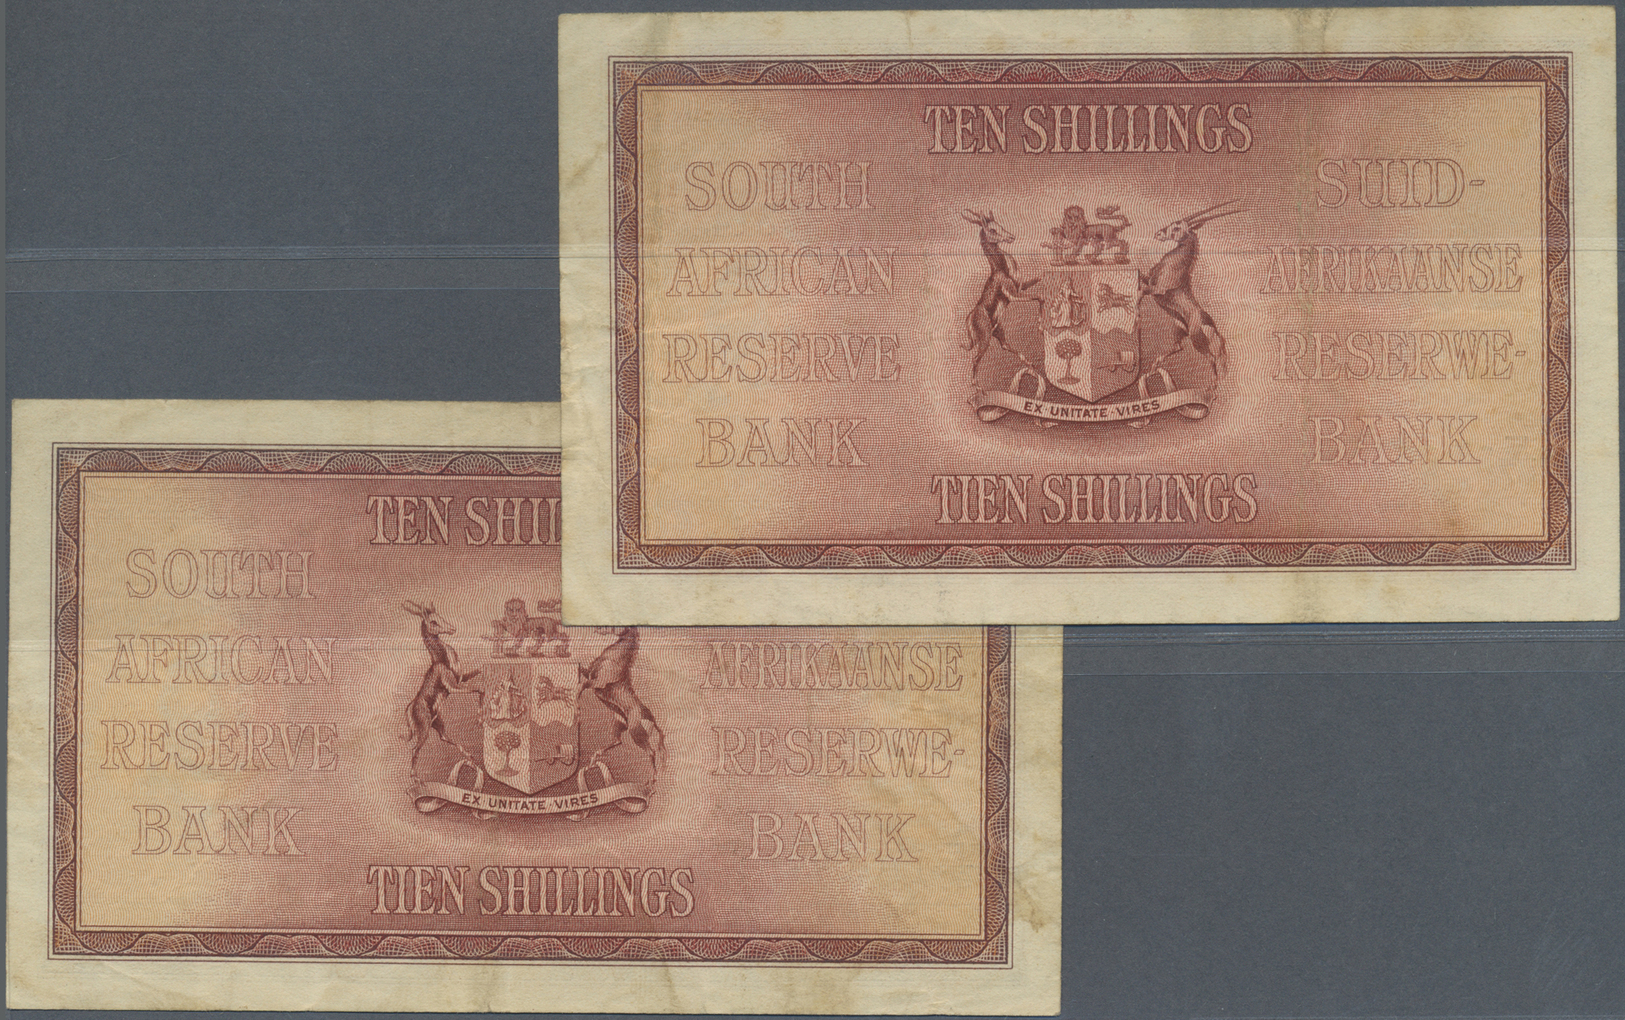 02945 South Africa / Südafrika: Set Of 2 Notes 10 Shilings 1947 P. 82e Used With Folds But No Holes Or Tears, Still Stro - Afrique Du Sud